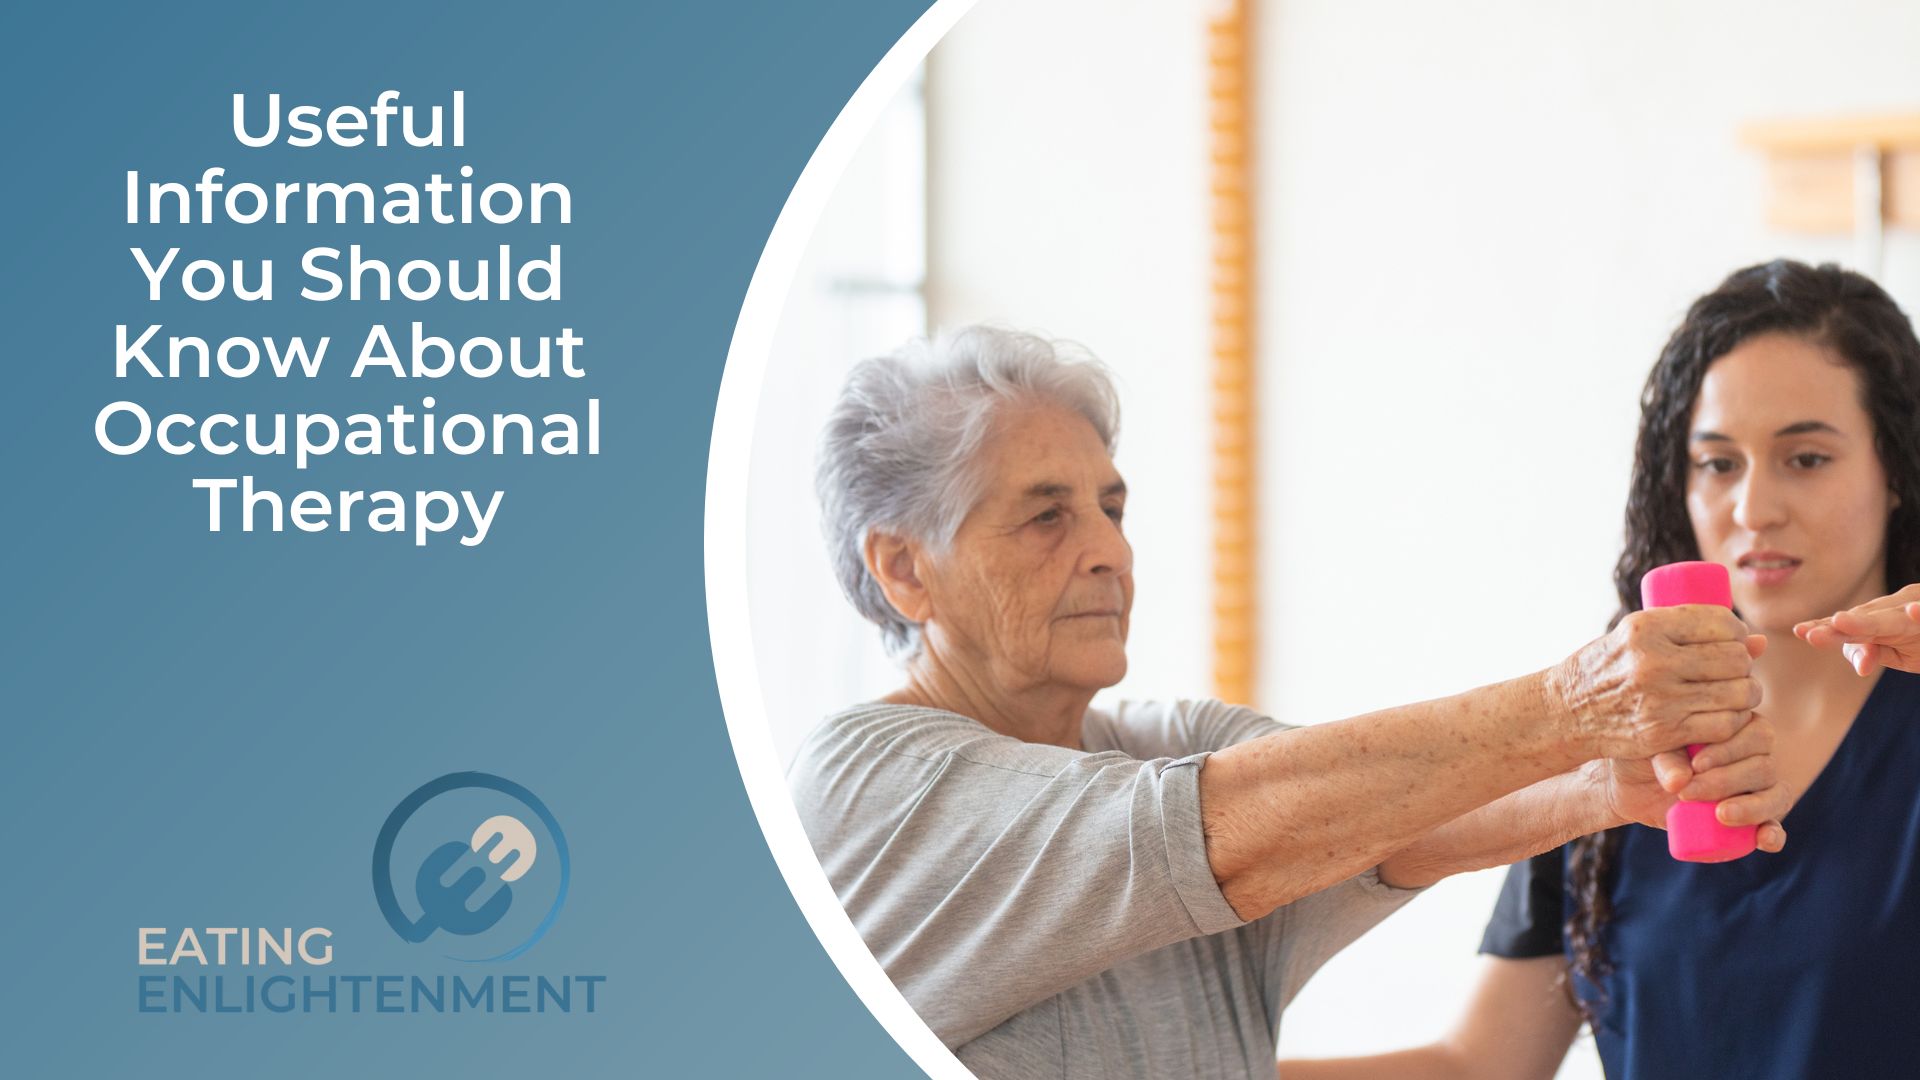 Useful Information You Should Know About Occupational Therapy